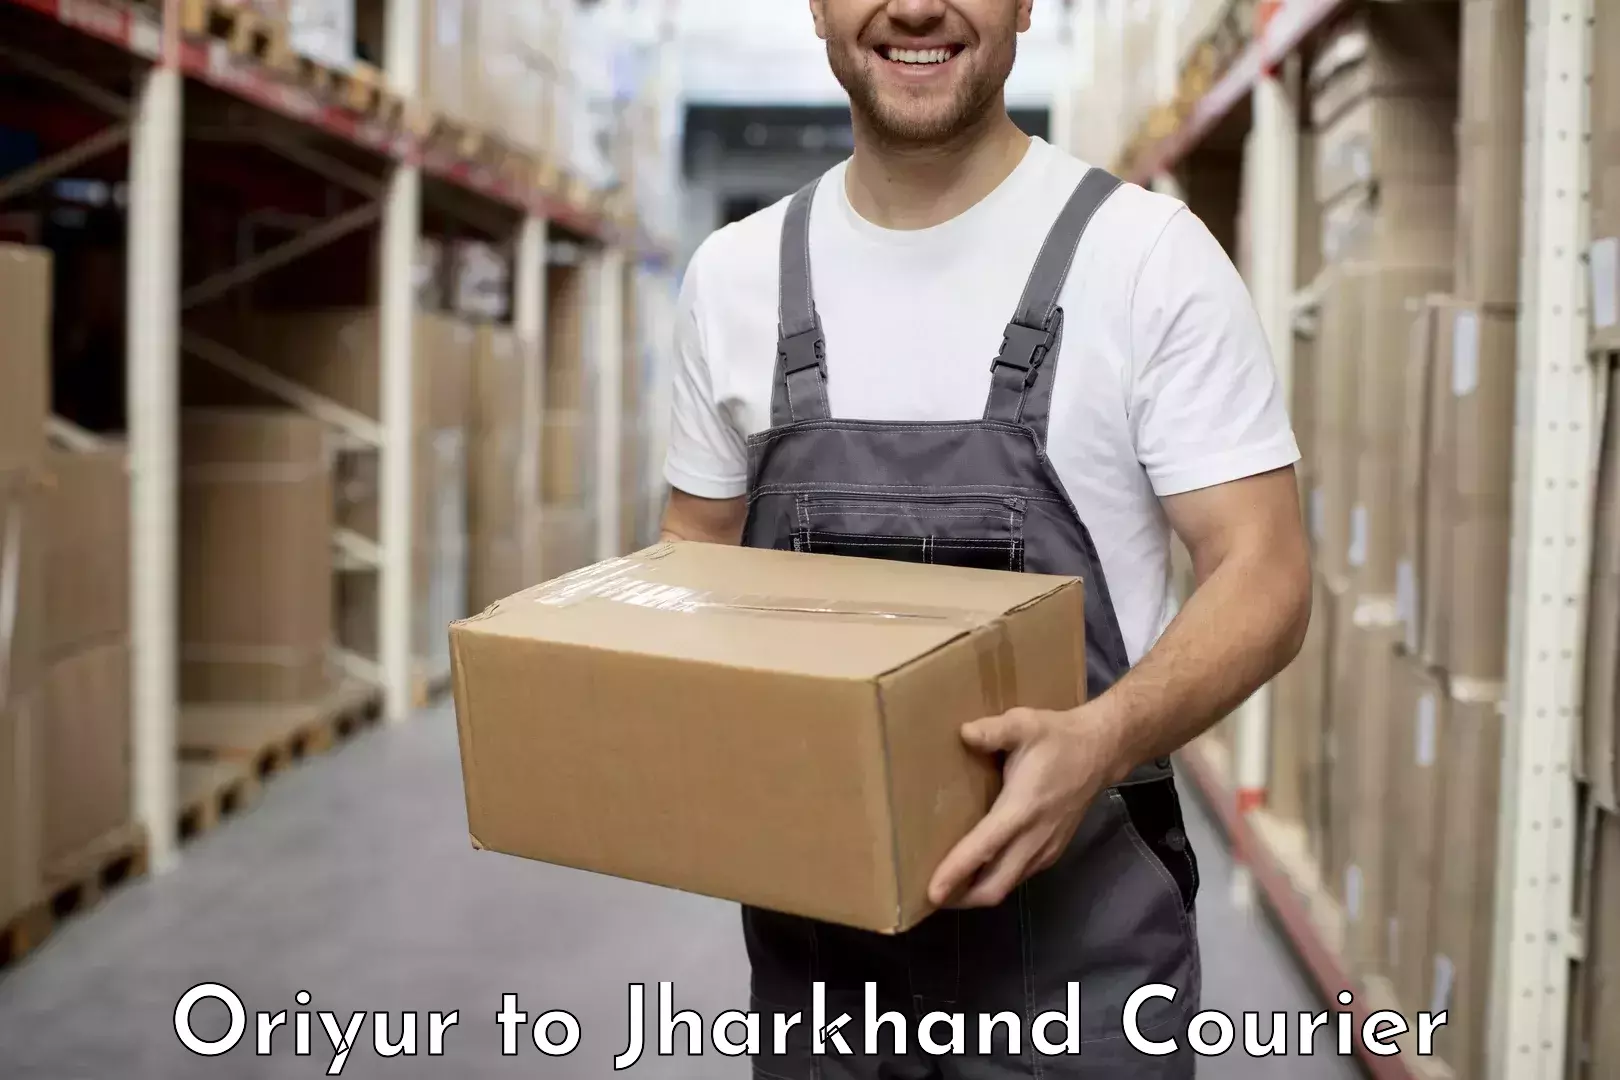 Customer-oriented courier services Oriyur to Jharkhand